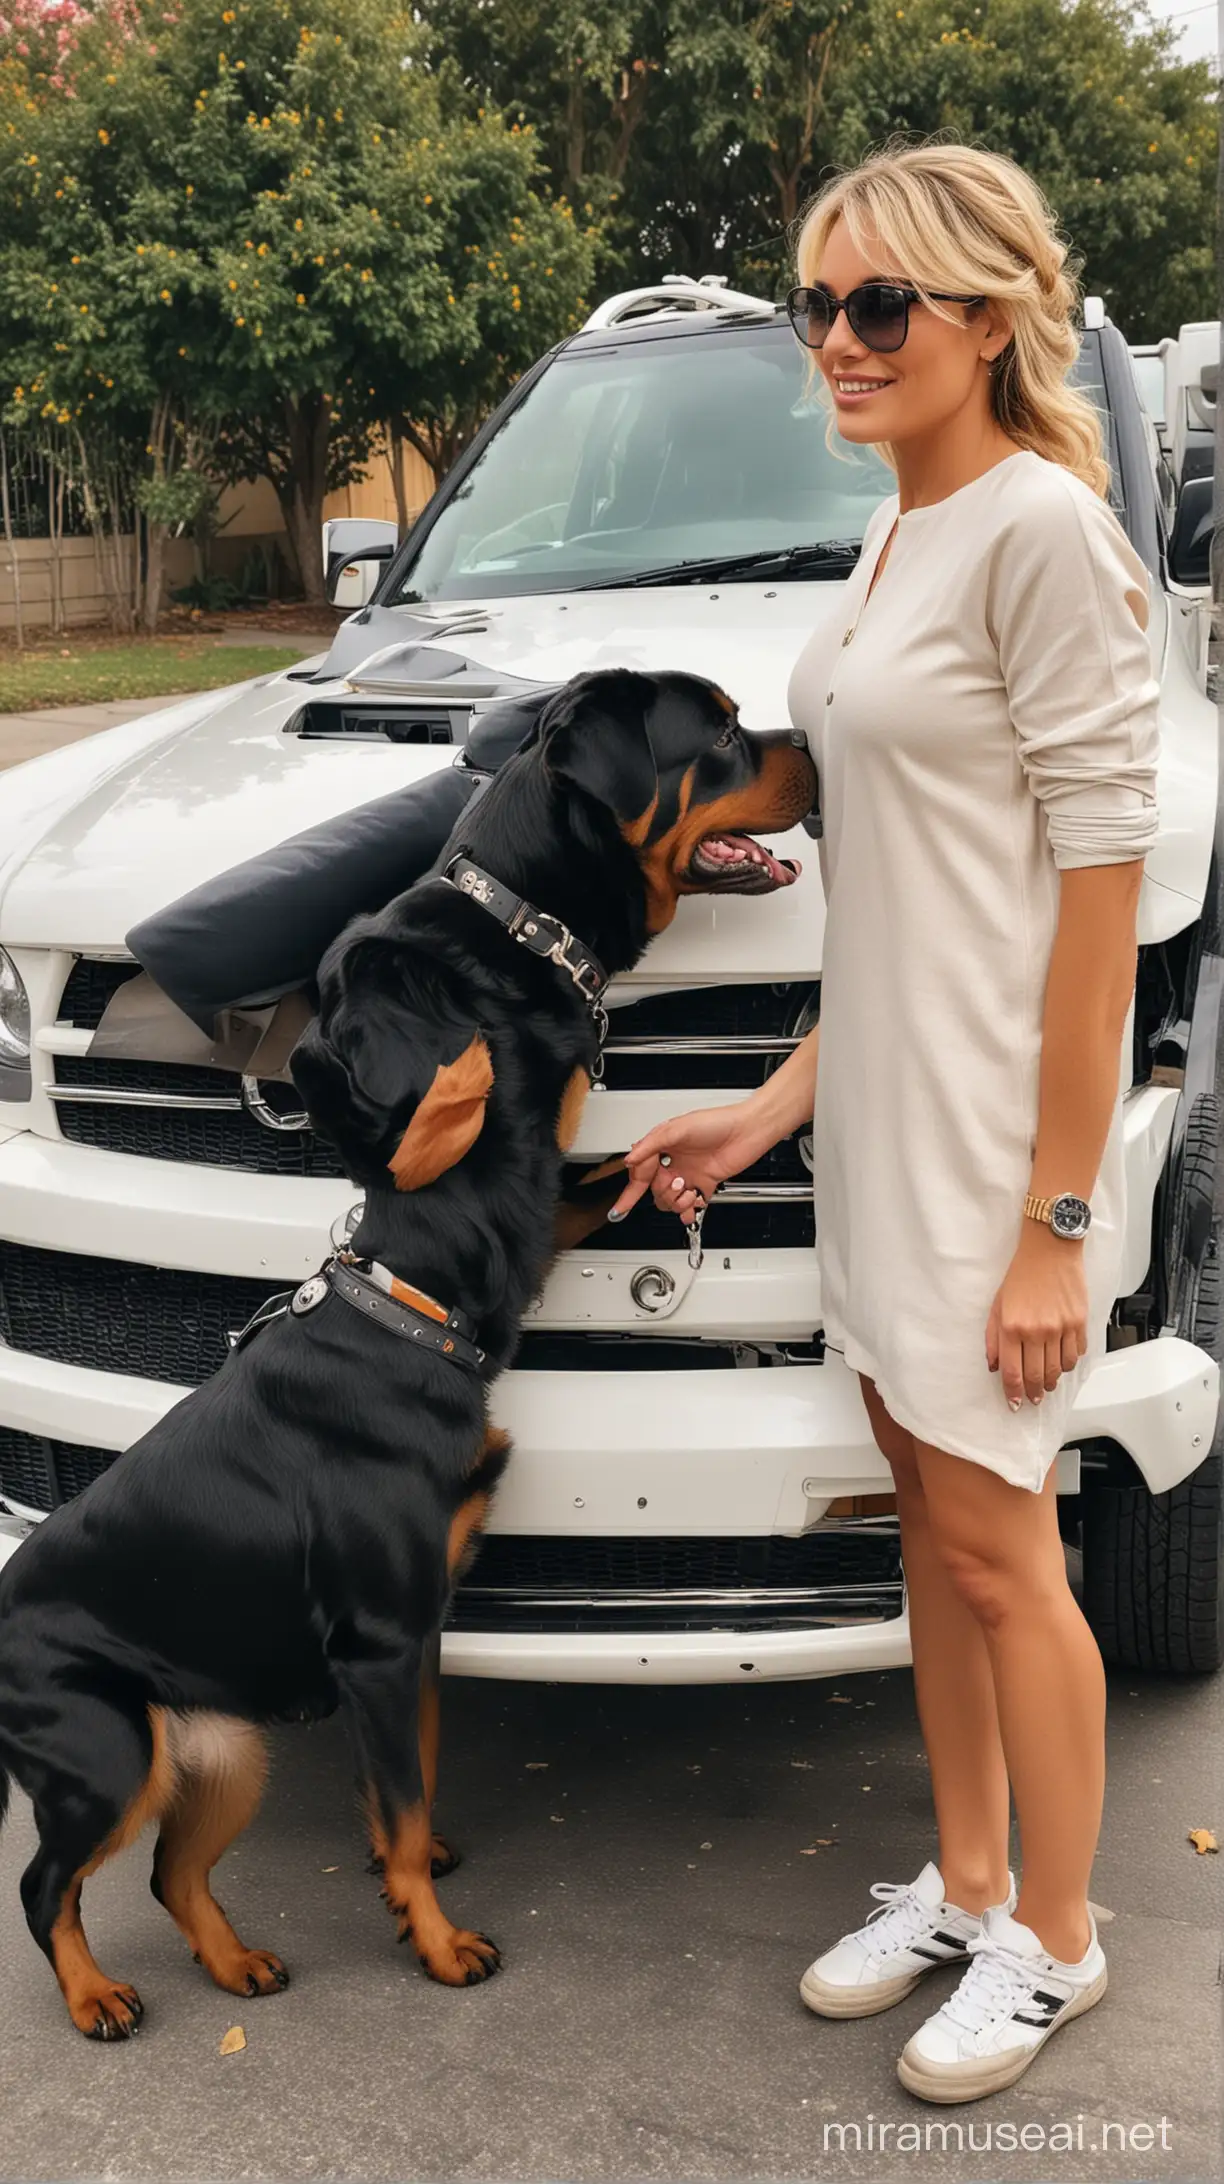 Kind Black Rottweiler Playing with Beautiful Blonde Woman Next to White Mercedes